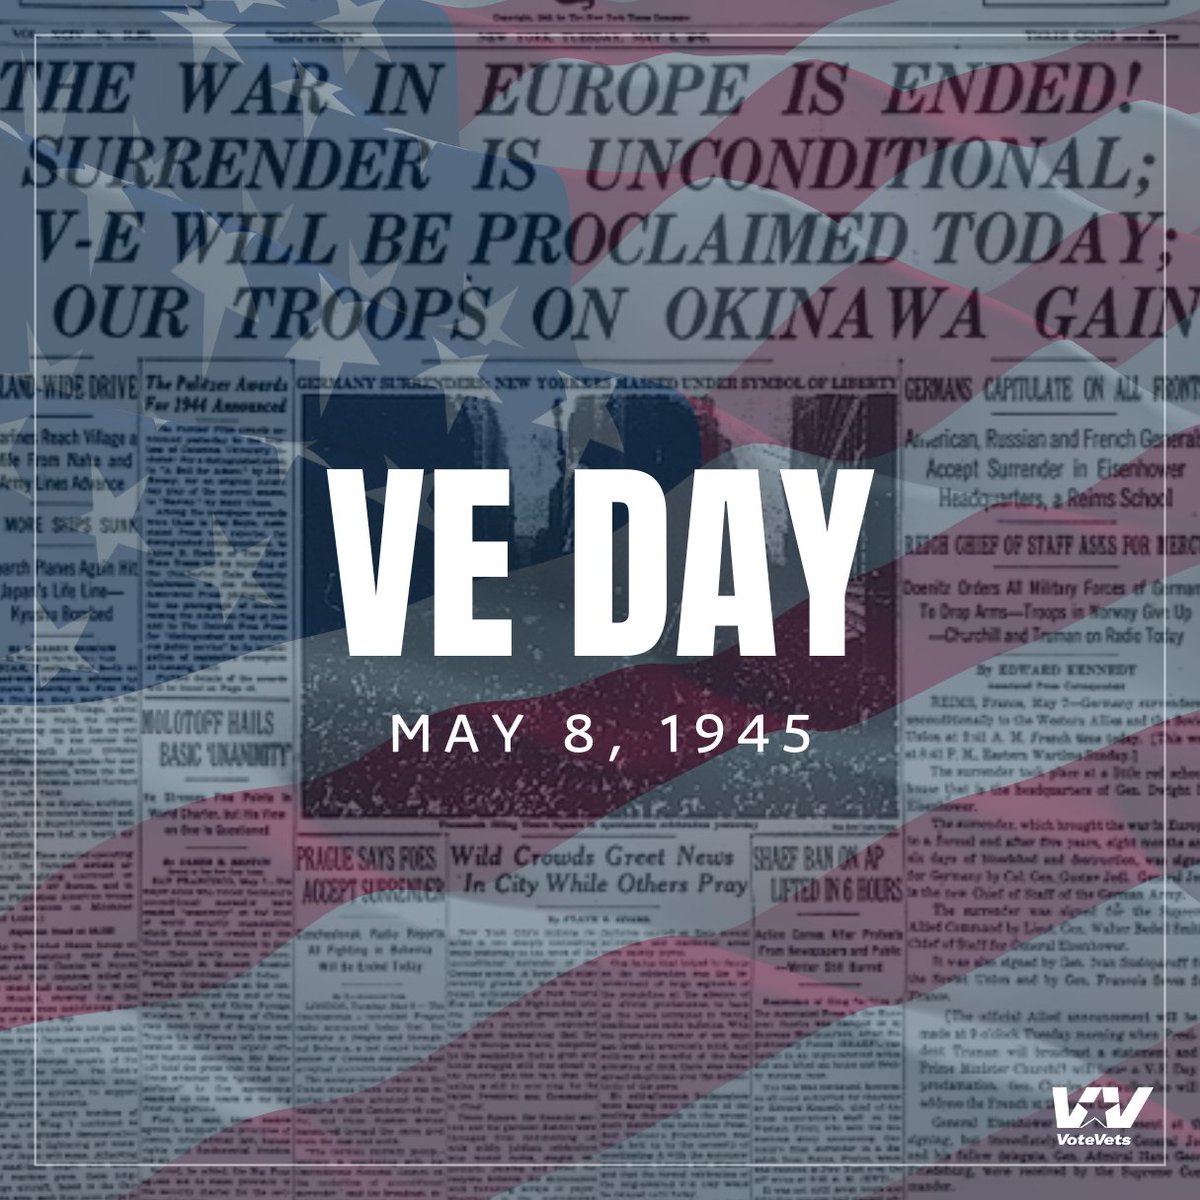 On the anniversary of VE Day, we honor those who served and ensured tyranny didn't prevail. Their sacrifice reminds us of our duty to uphold freedom and democracy. Let's continue their legacy now and always.